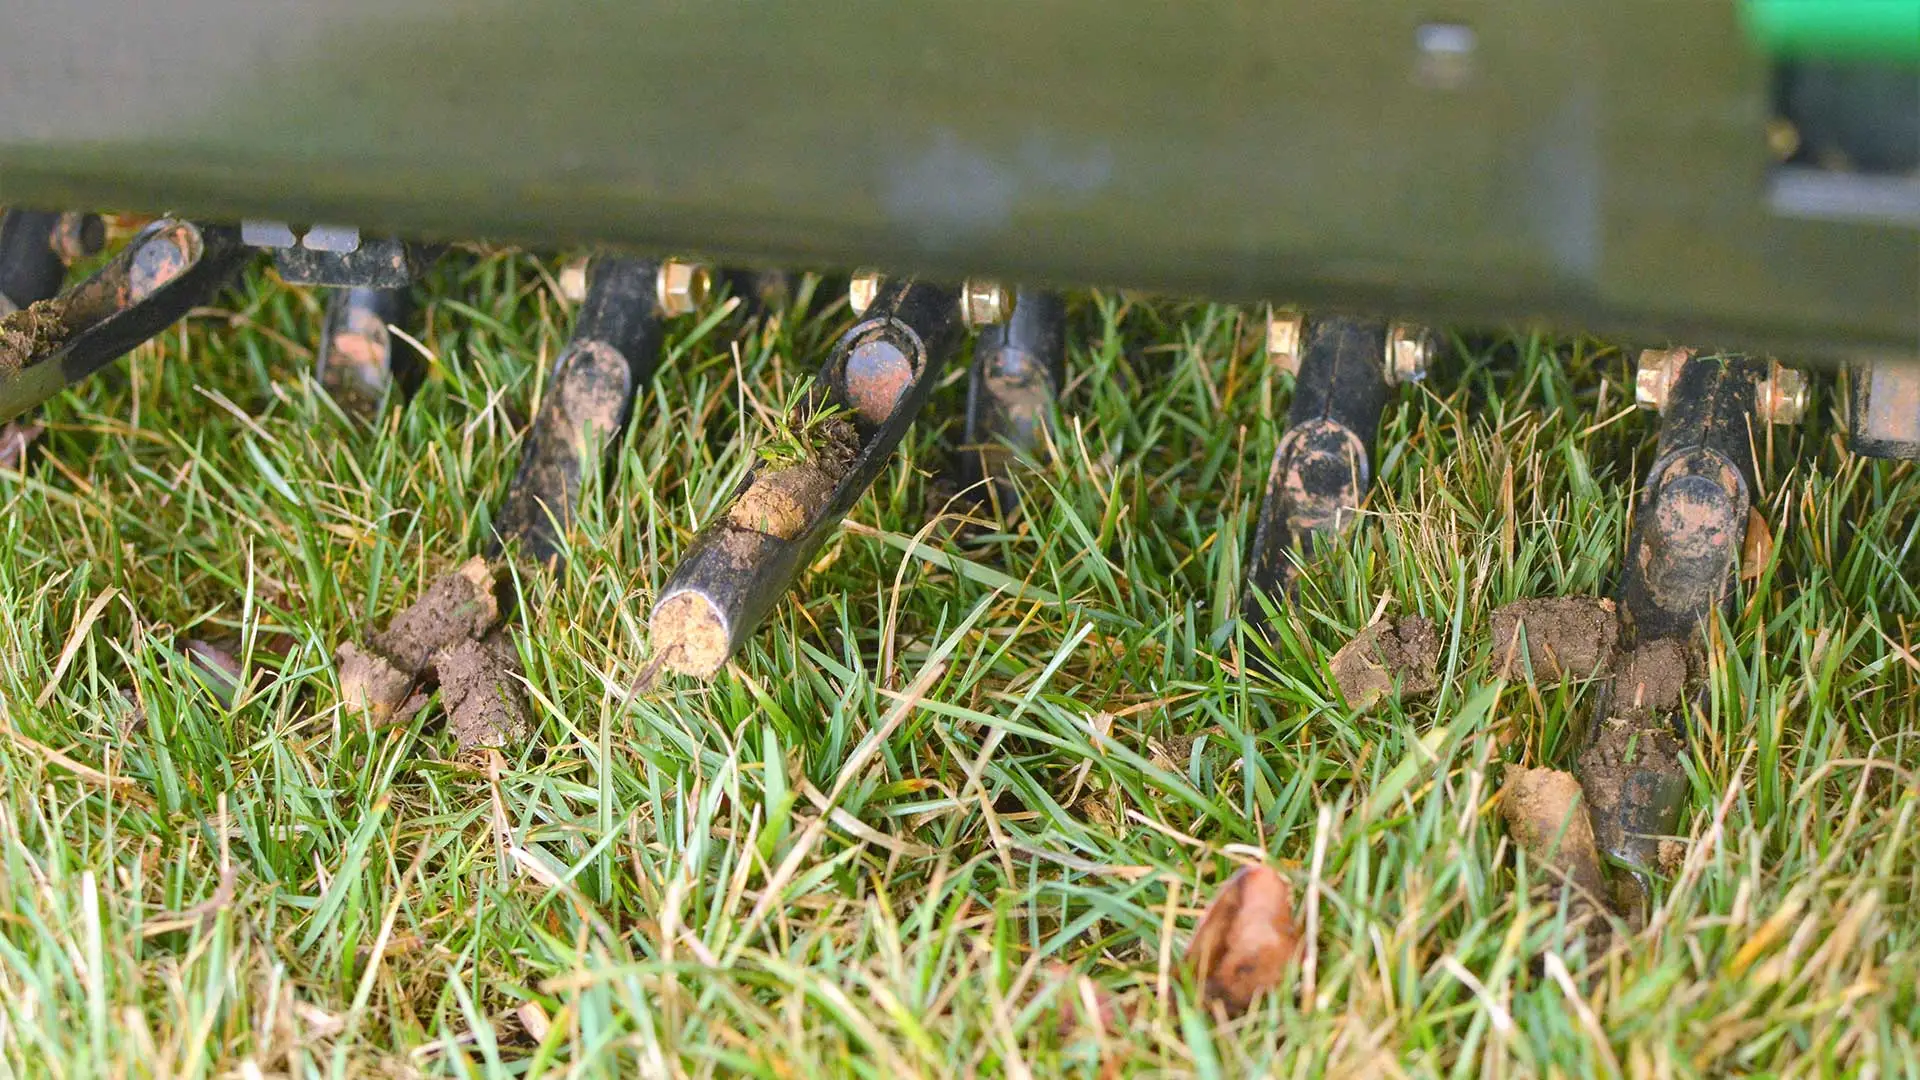 What Should You Do With the Cores Left Over on Your Lawn From Aeration?